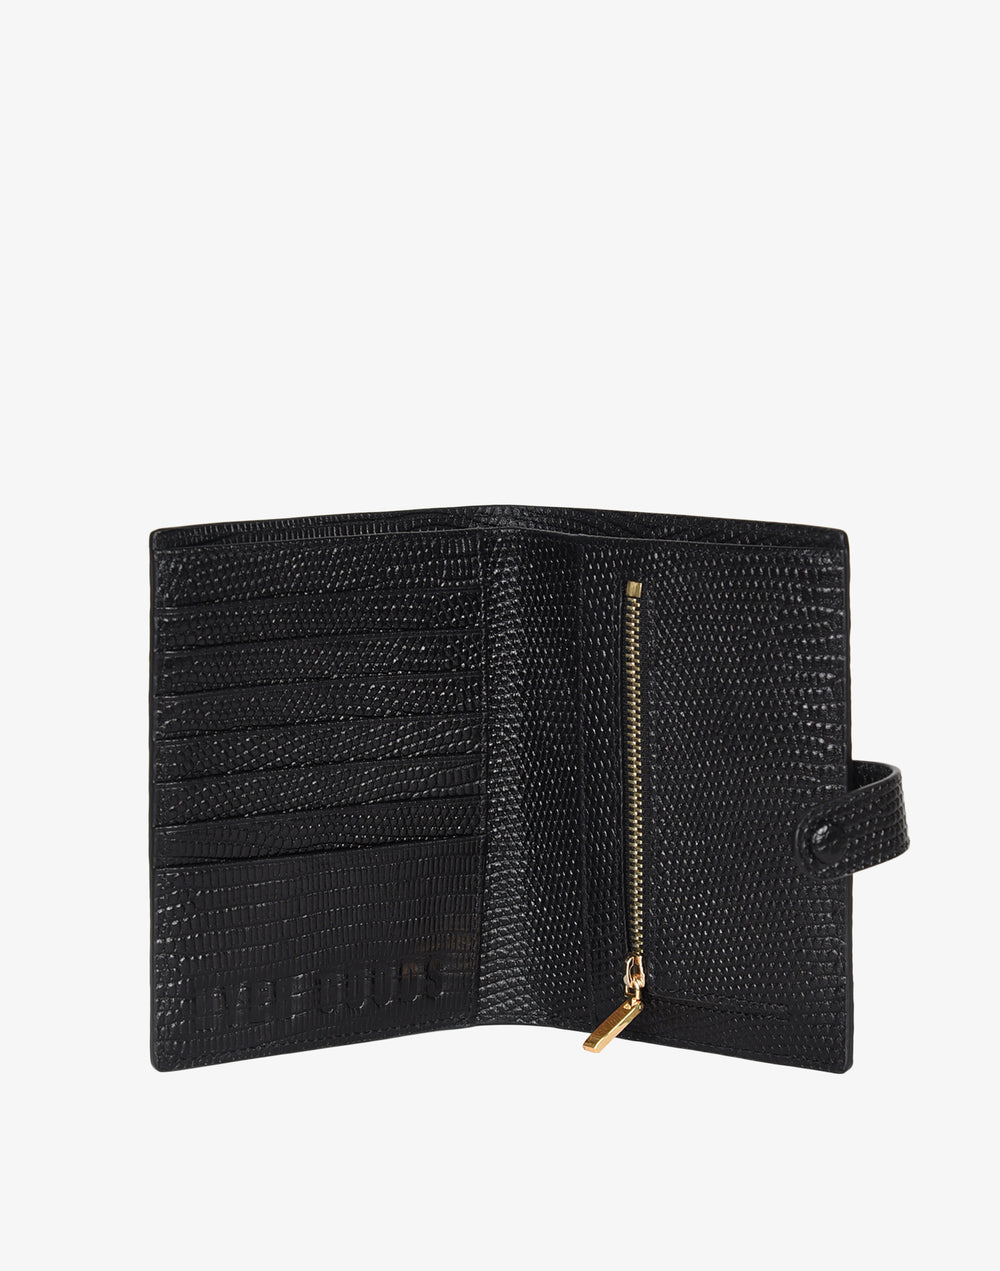 hyer goods recycled leather travel passport wallet with zipper pocket embossed black lizard#color_black-lizard